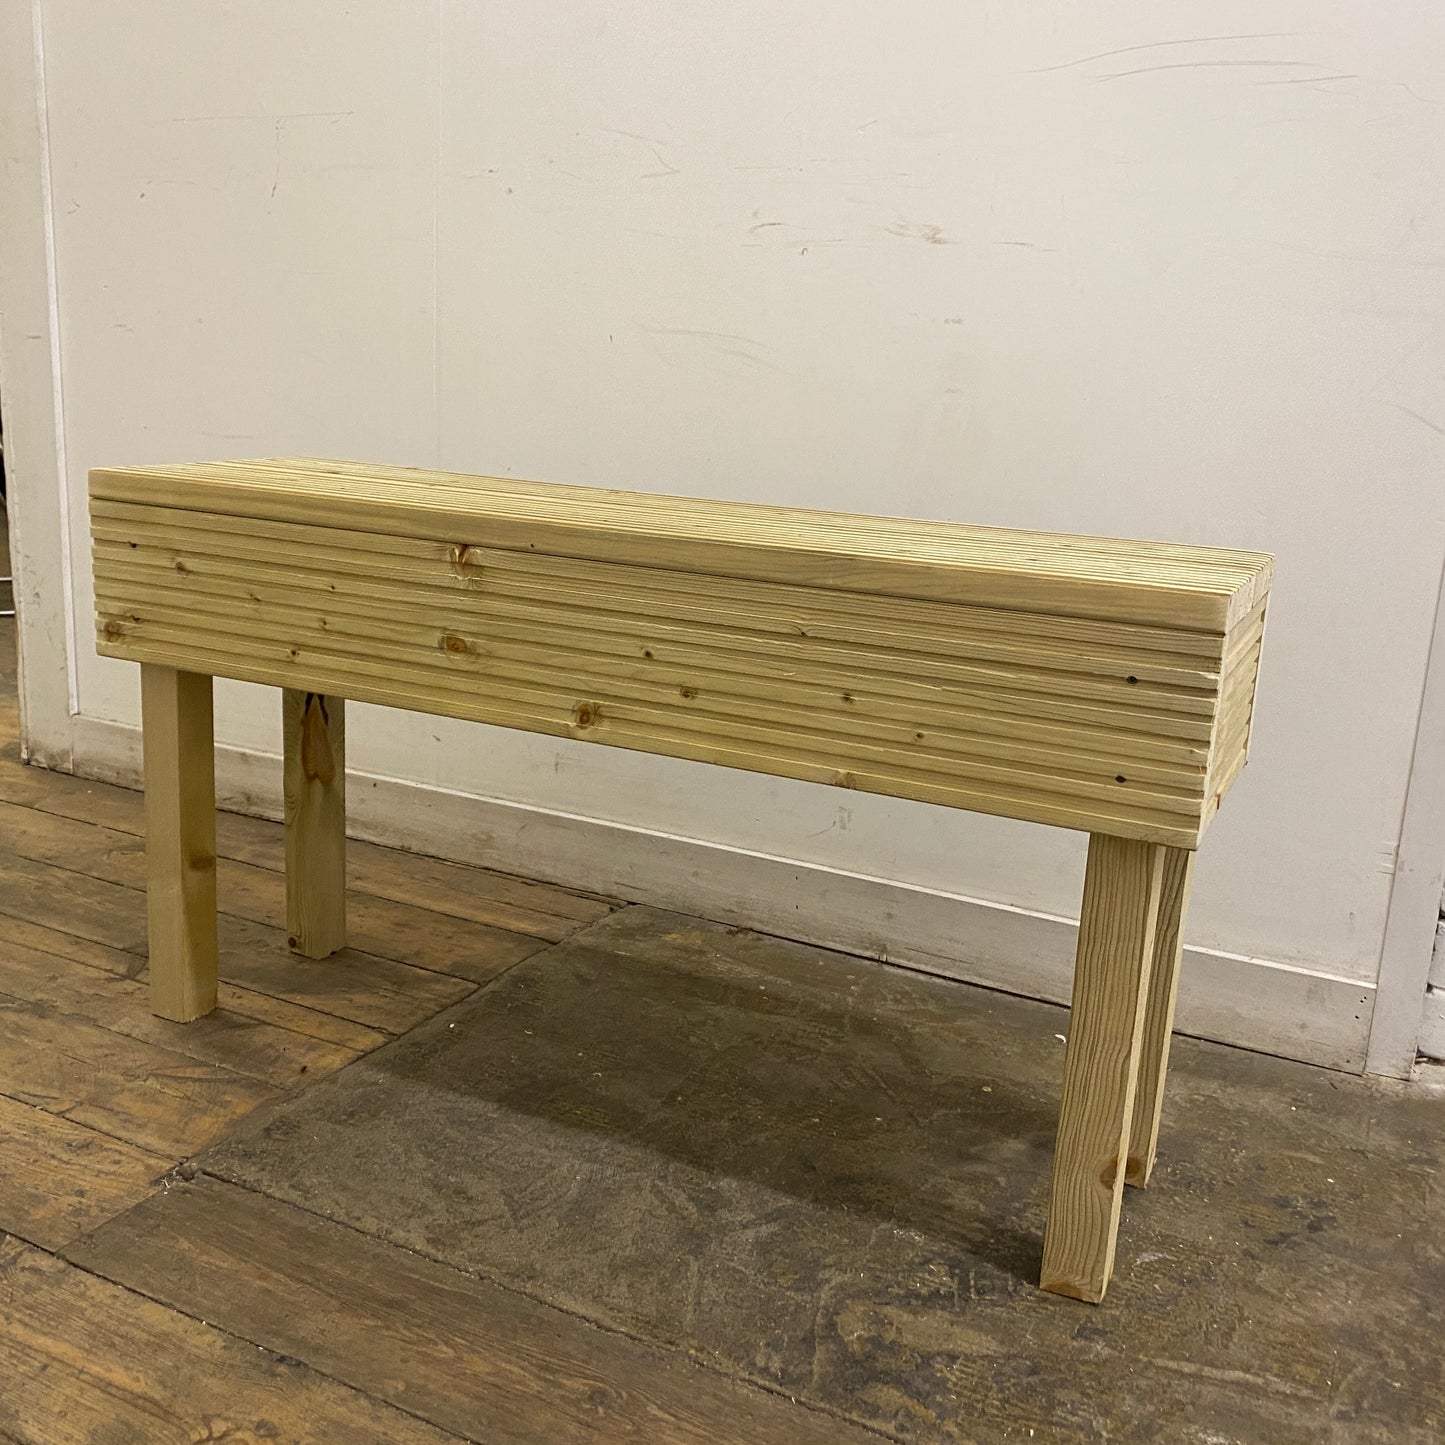 Wooden Decking Bench Groved Seat